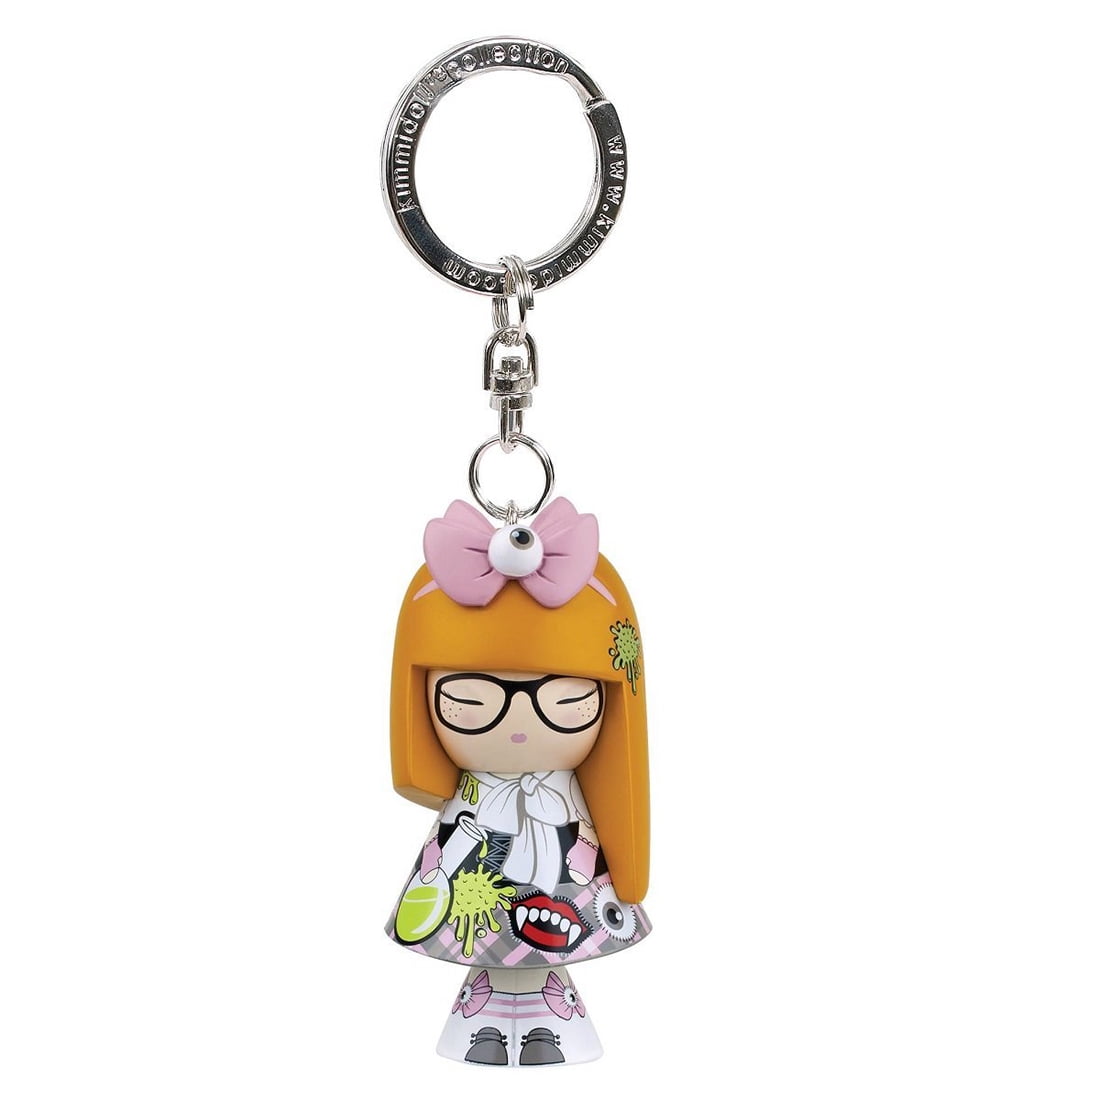 Details about   KIMMIDOLL COLLECTION KEYCHAIN NONOKO CAREFREE TGKK271  NEW RELEASE 08/2019